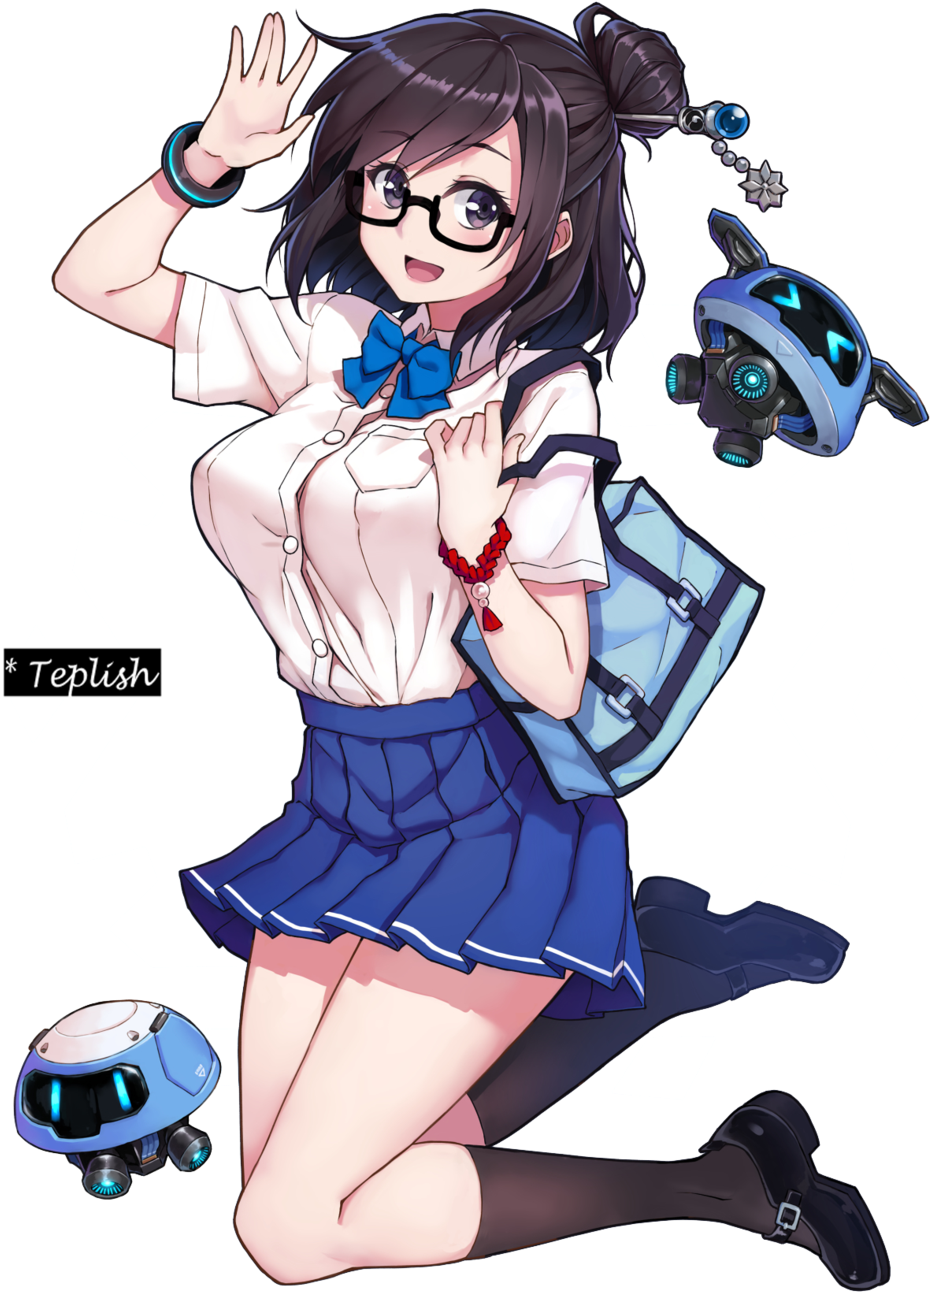 A Cartoon Of A Girl With Glasses And A Backpack